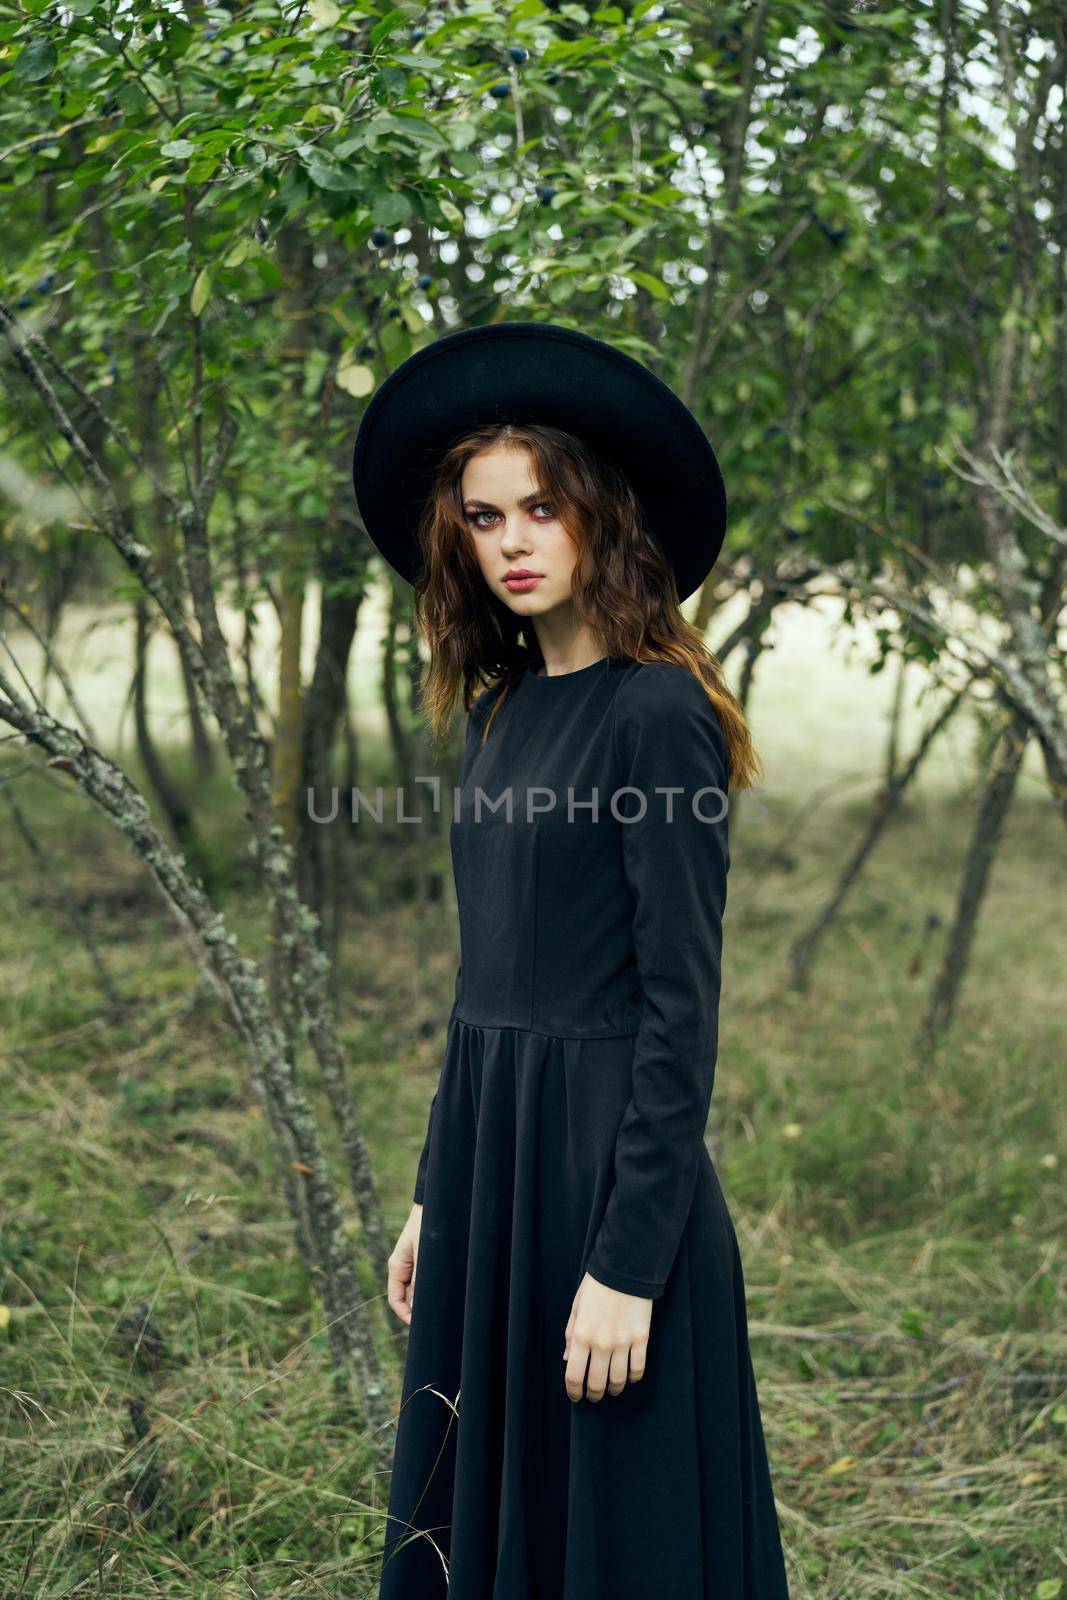 witch in the woods posing costume halloween gothic style by Vichizh